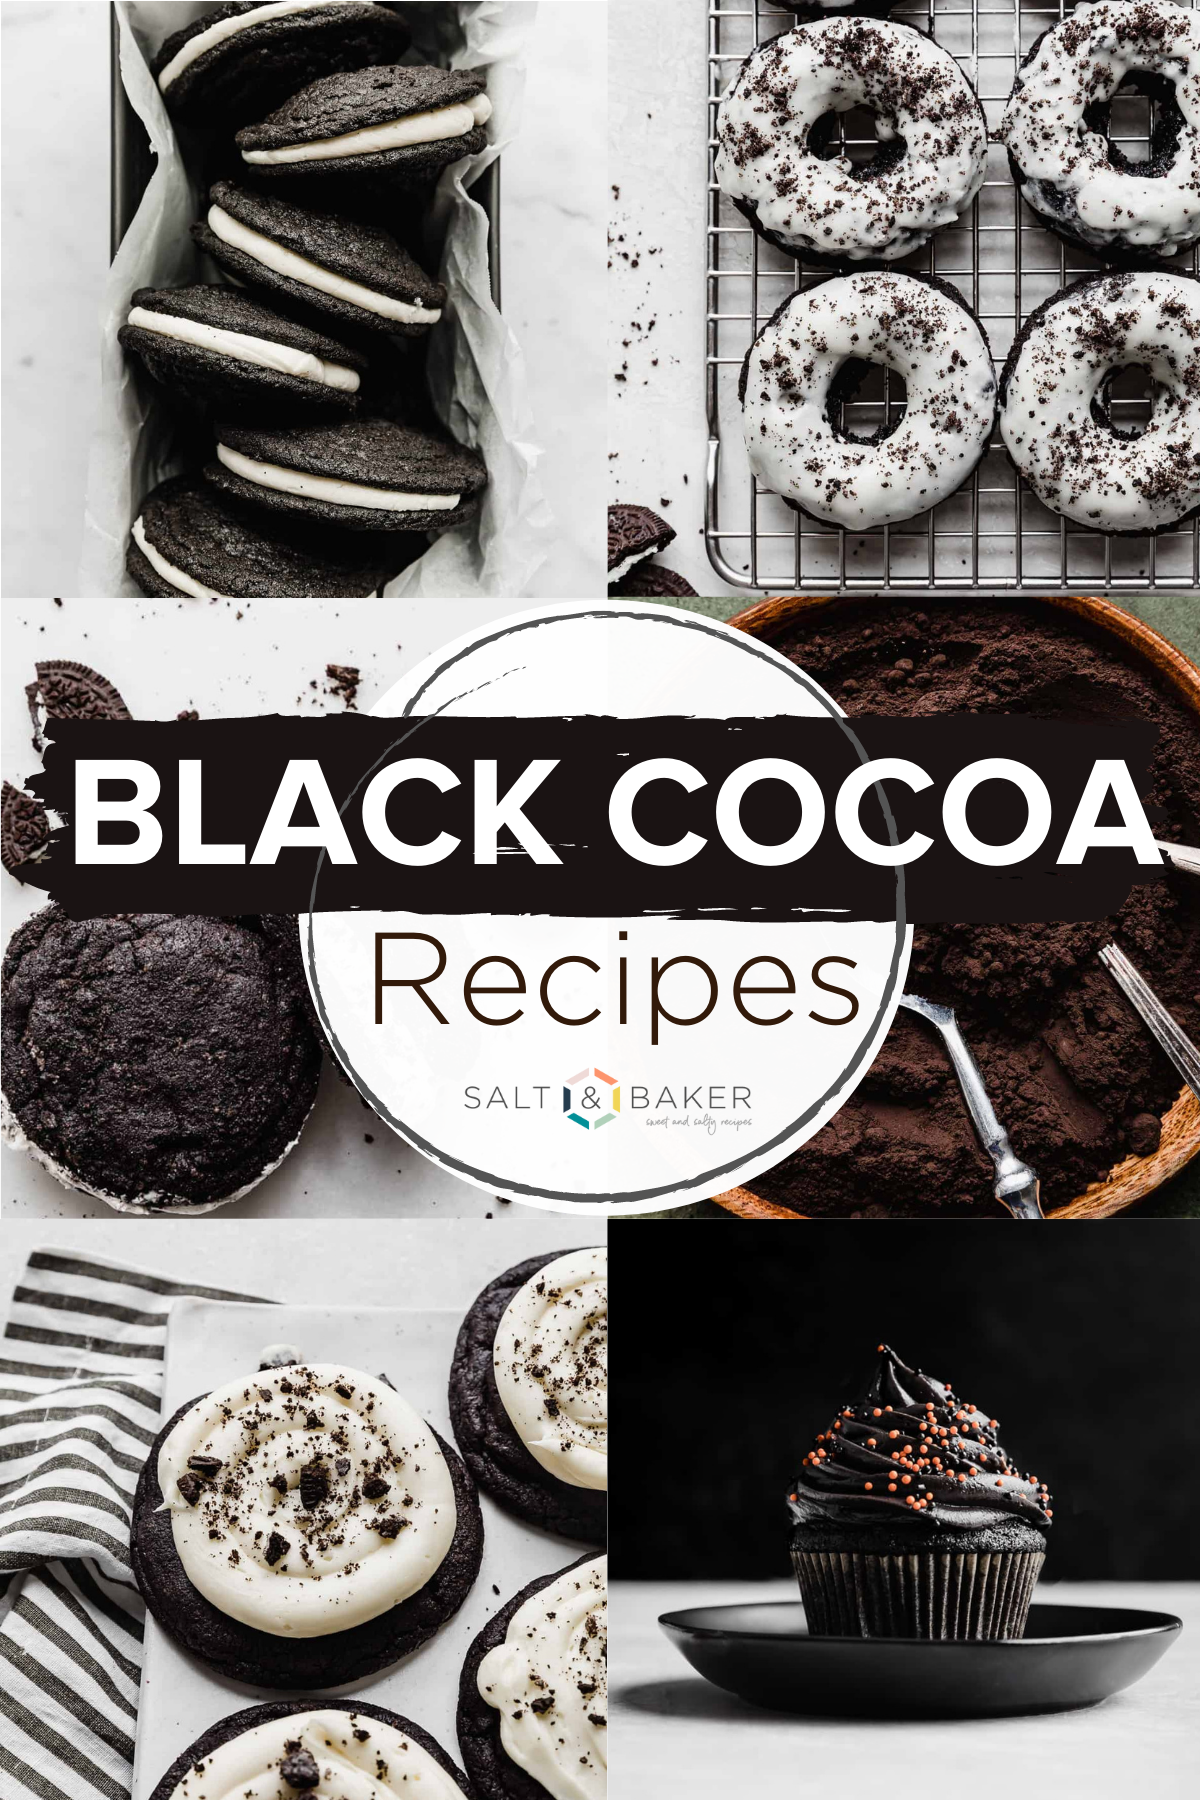 A collection of images of desserts made with black cocoa powder such as Oreo donuts, homemade Oreo cookies, black velvet cupcakes, black cocoa powder cookies, etc.